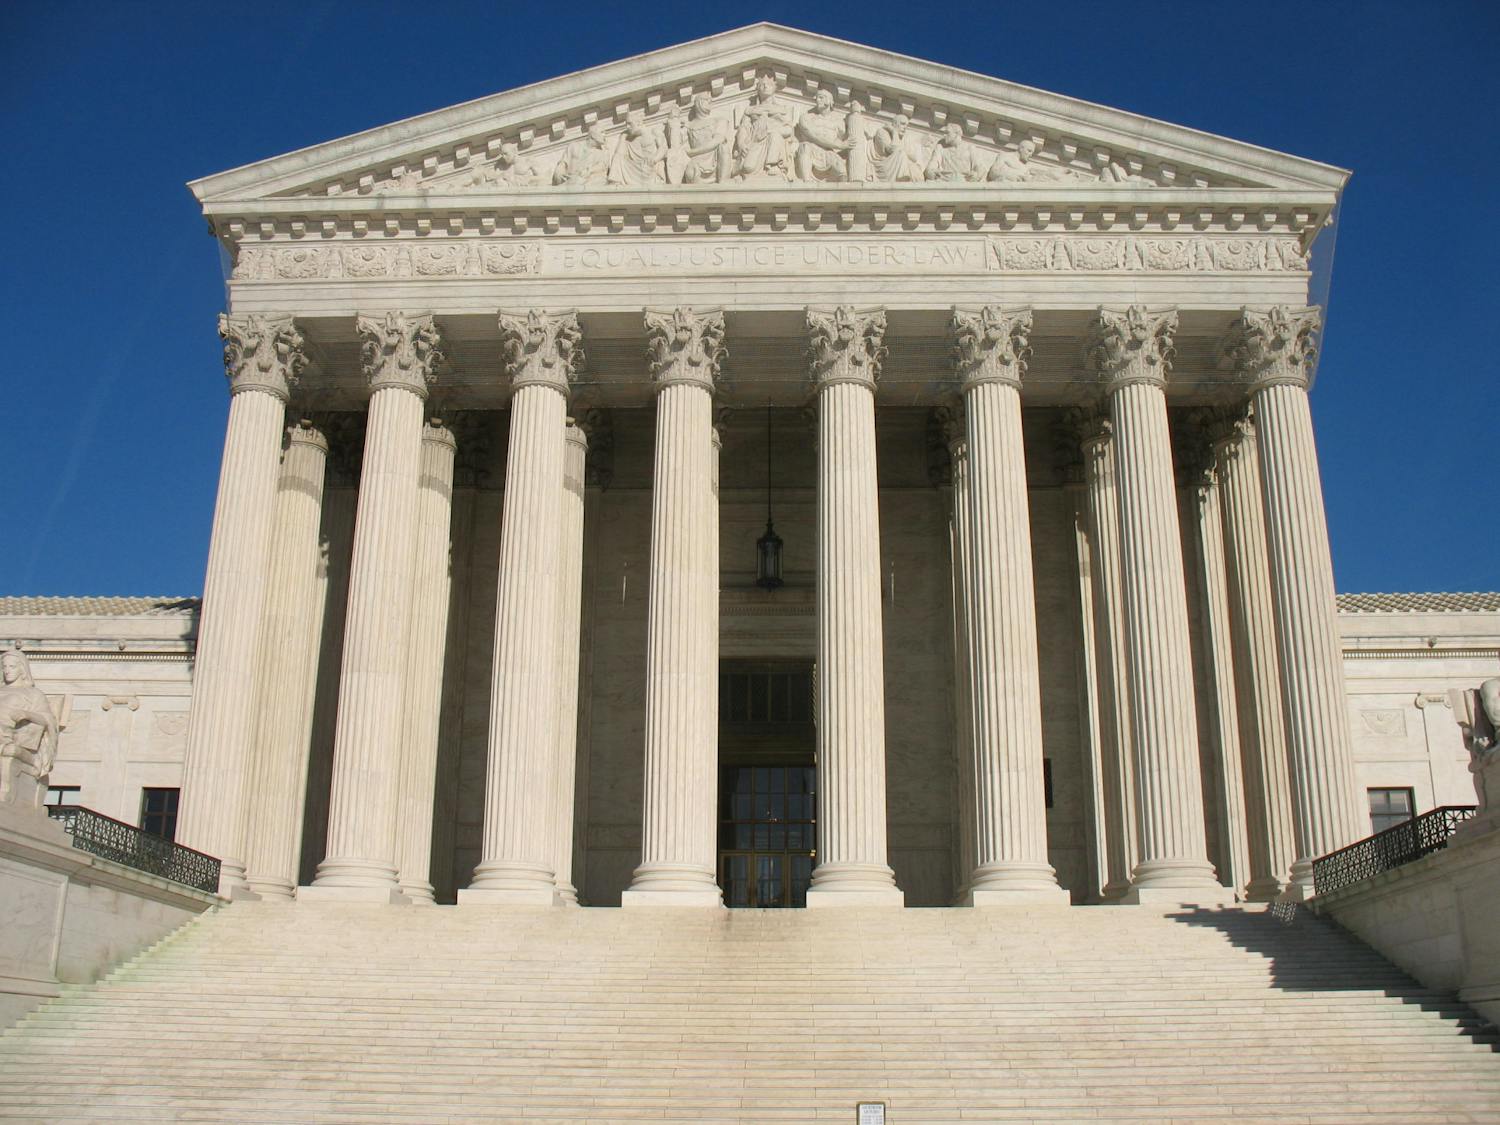 The question of who is responsible for the content we see online, the user or the platform, is being raised as the Supreme Court reexamines Section 230 of the 1996 Communications Decency Act in two recent cases (Photo courtesy of Flickr/ “US Supreme Court” by Kjetil Ree. March 8, 2007). 